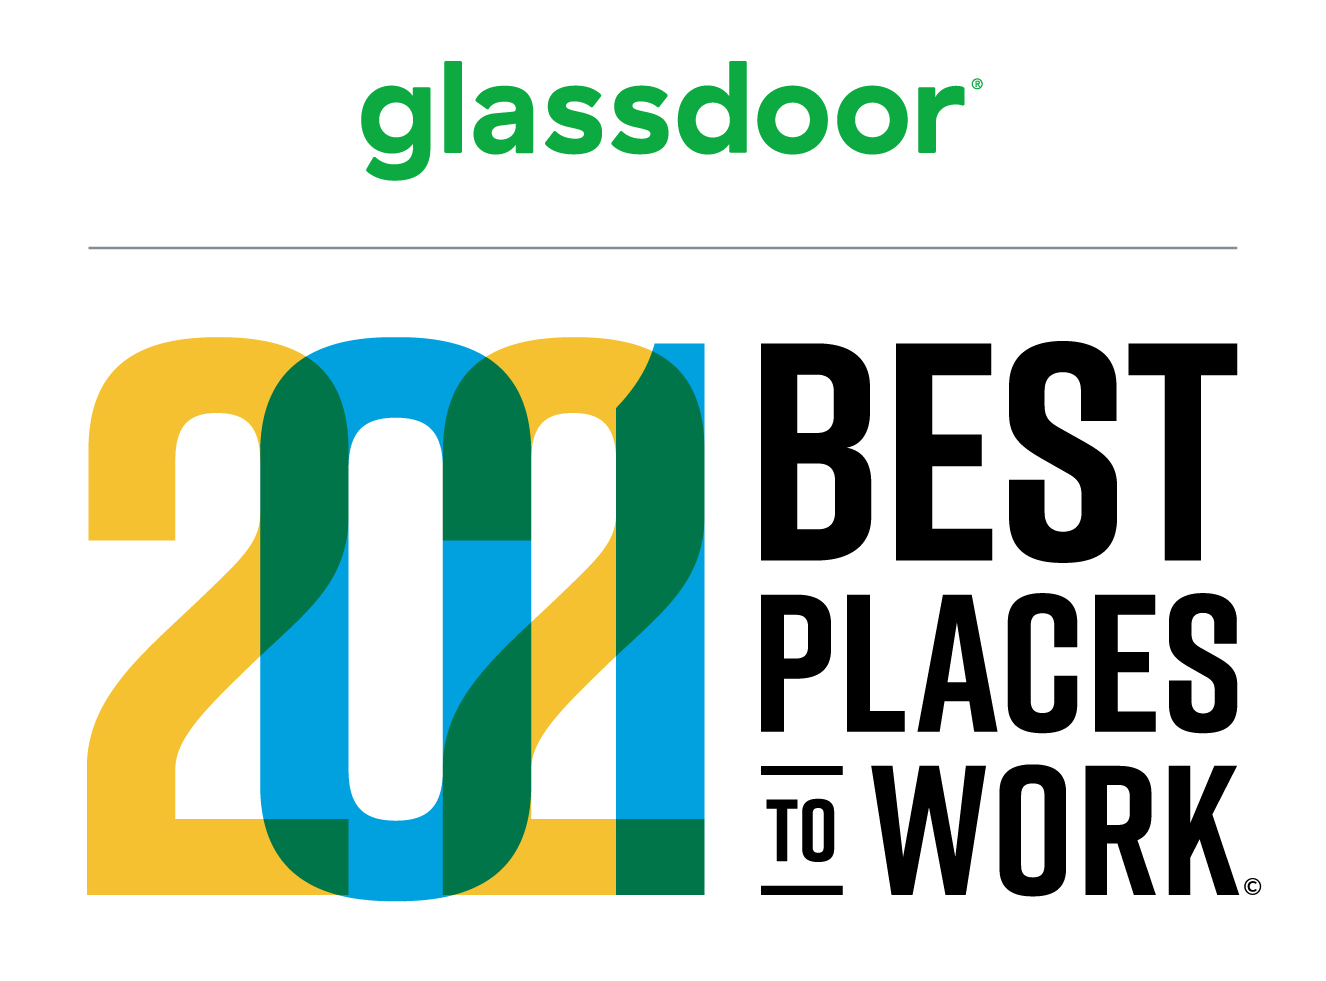 KnowBe4 Honored by Glassdoor as One of the Best Places to Work in 2021